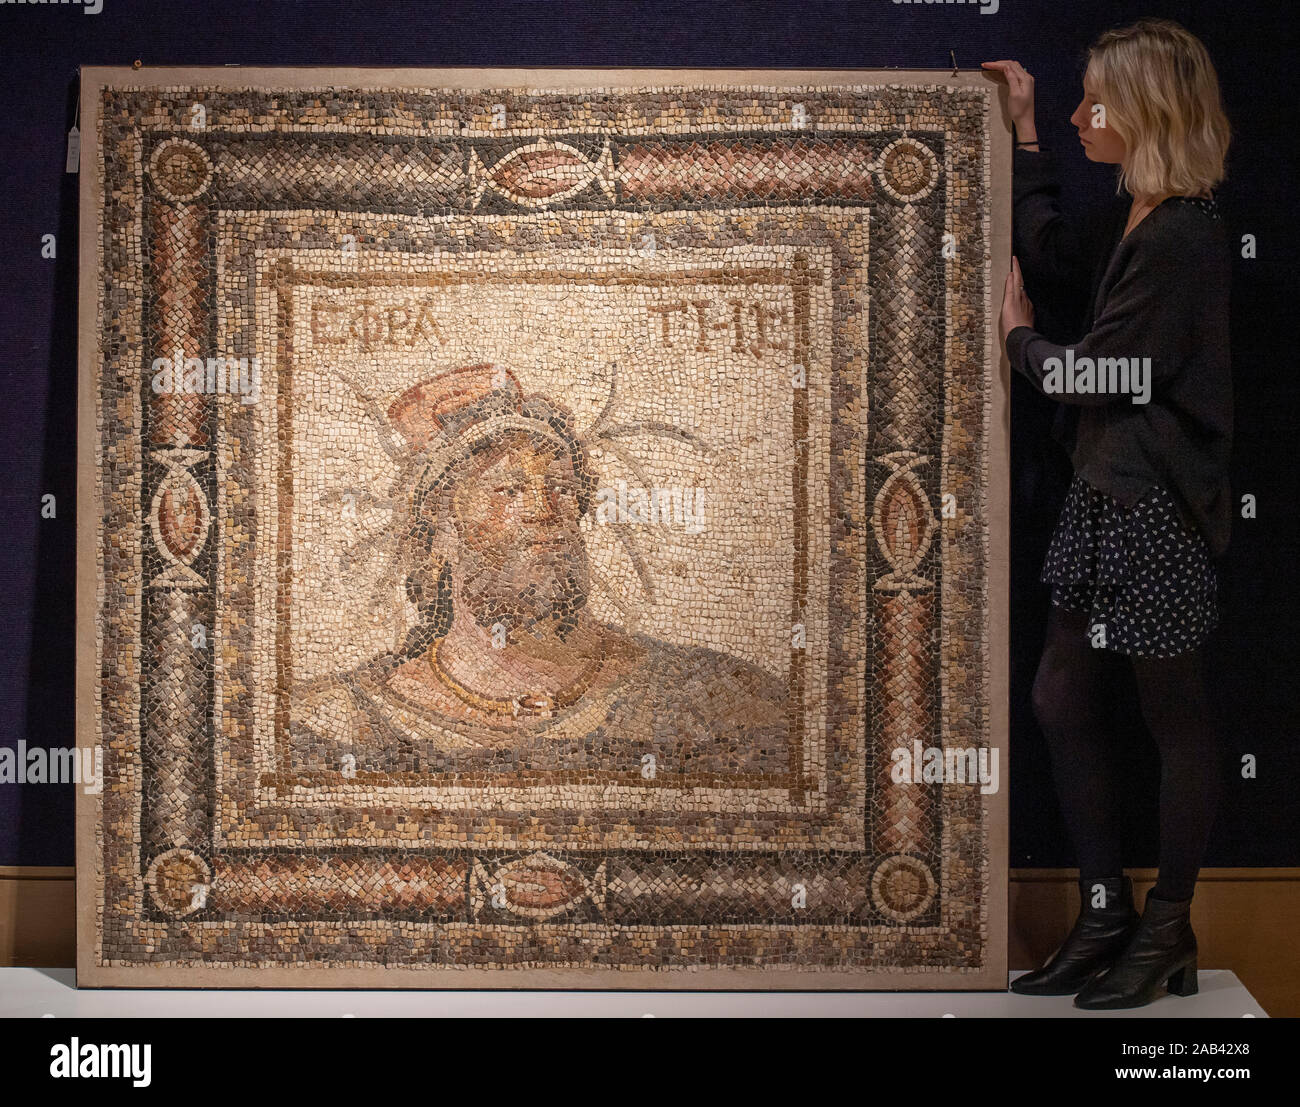 Bonhams, London, UK. 25th November 2019. The Antiquities Sale. A Roman marble mosaic panel with a representation of the Euphrates, estimate £30,000-40,000. Credit: Malcolm Park/Alamy Live News. Stock Photo